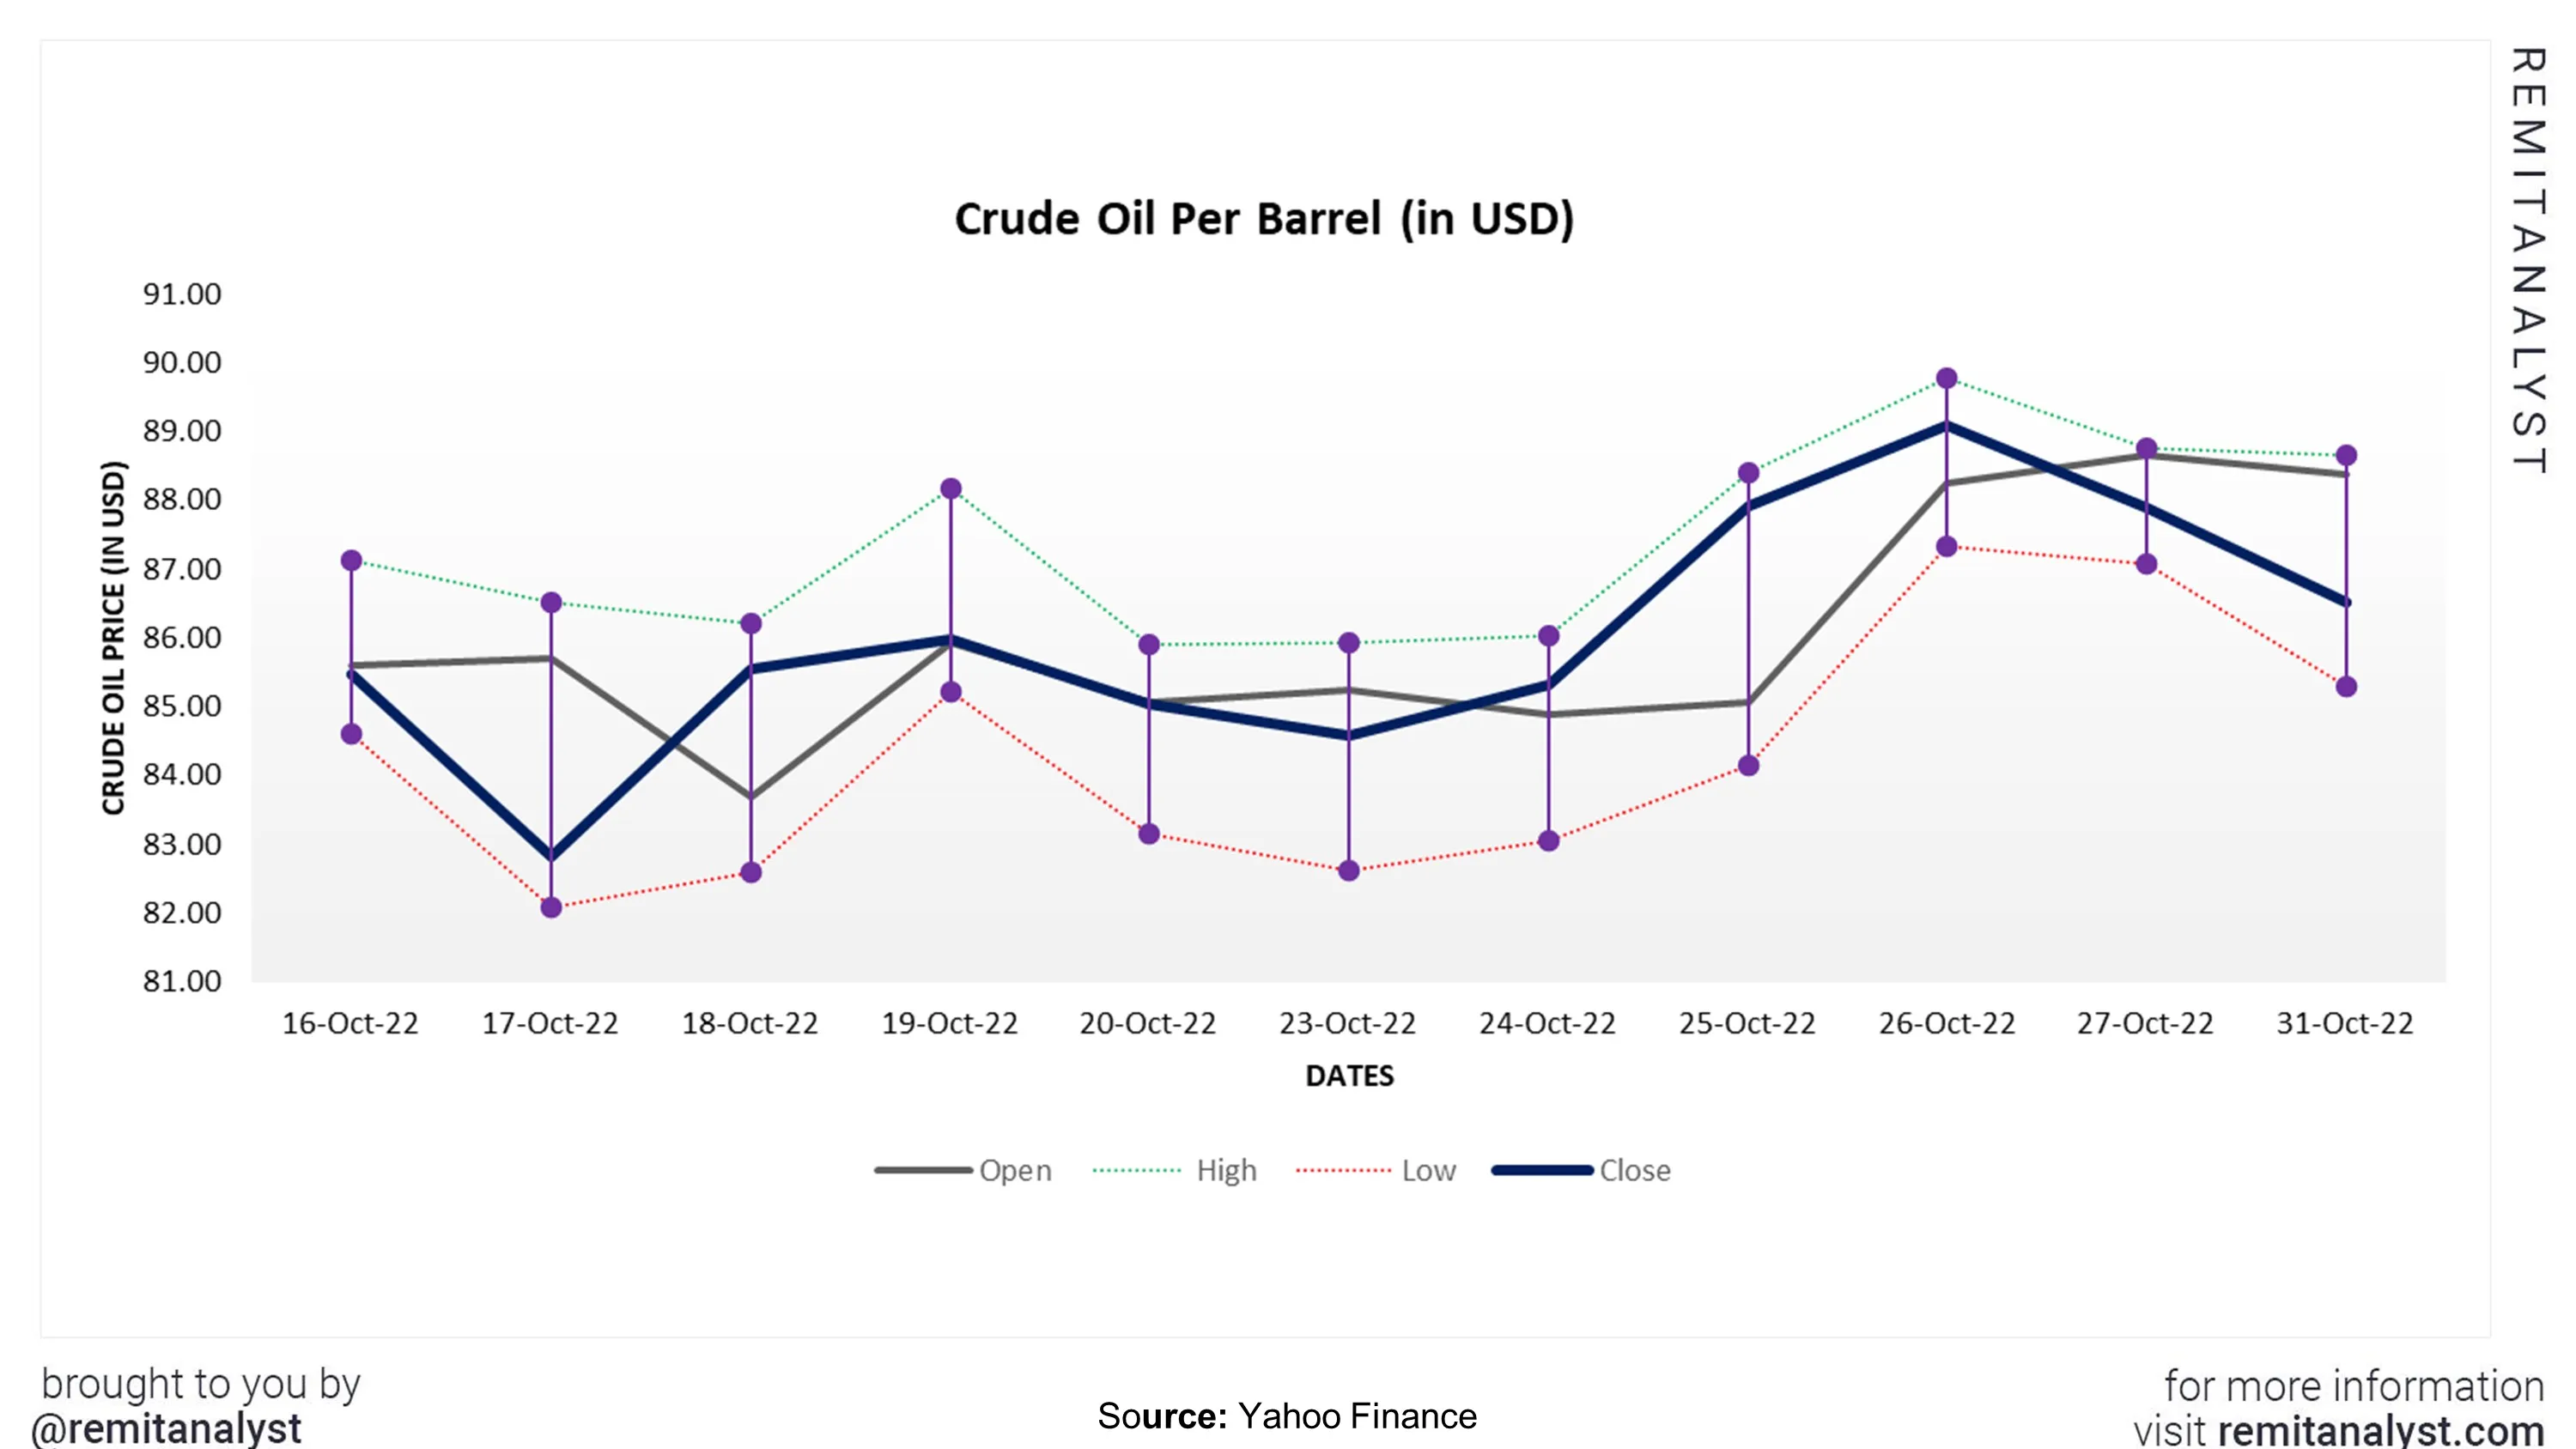 crude-oil-prices-from-16-oct-2022-to-31-oct-2022